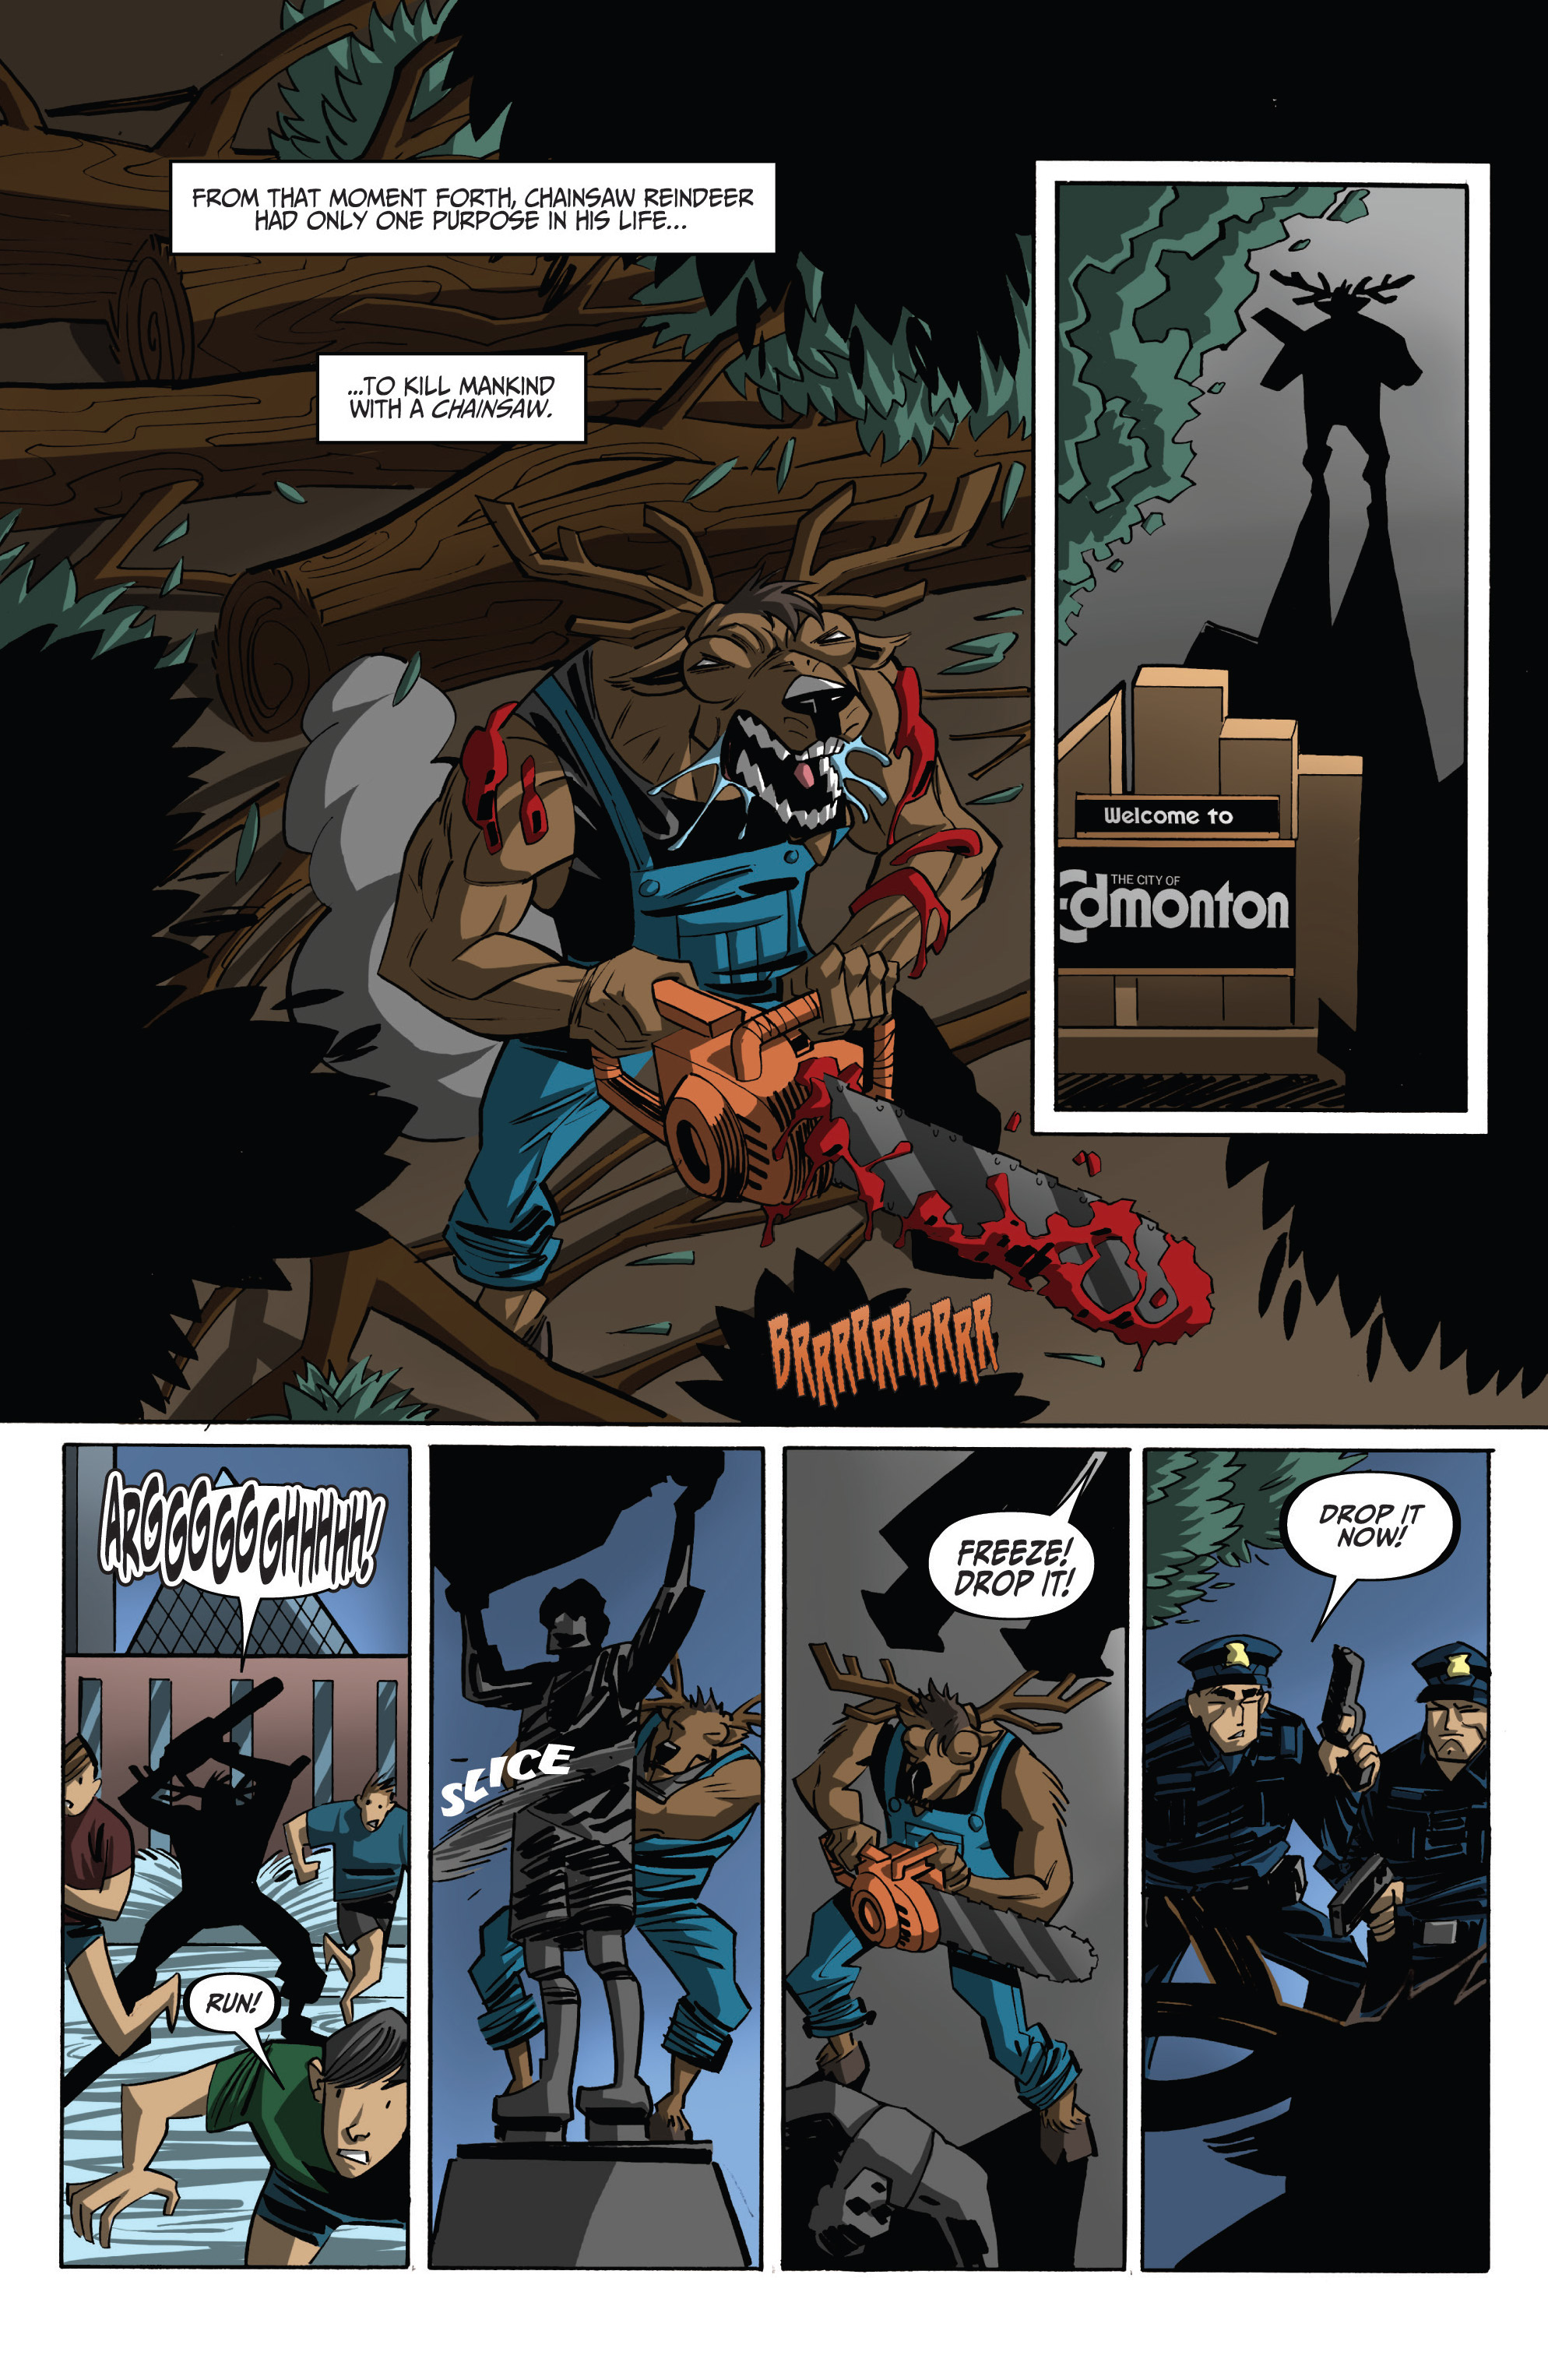 Read online Chainsaw Reindeer comic -  Issue # Full - 11